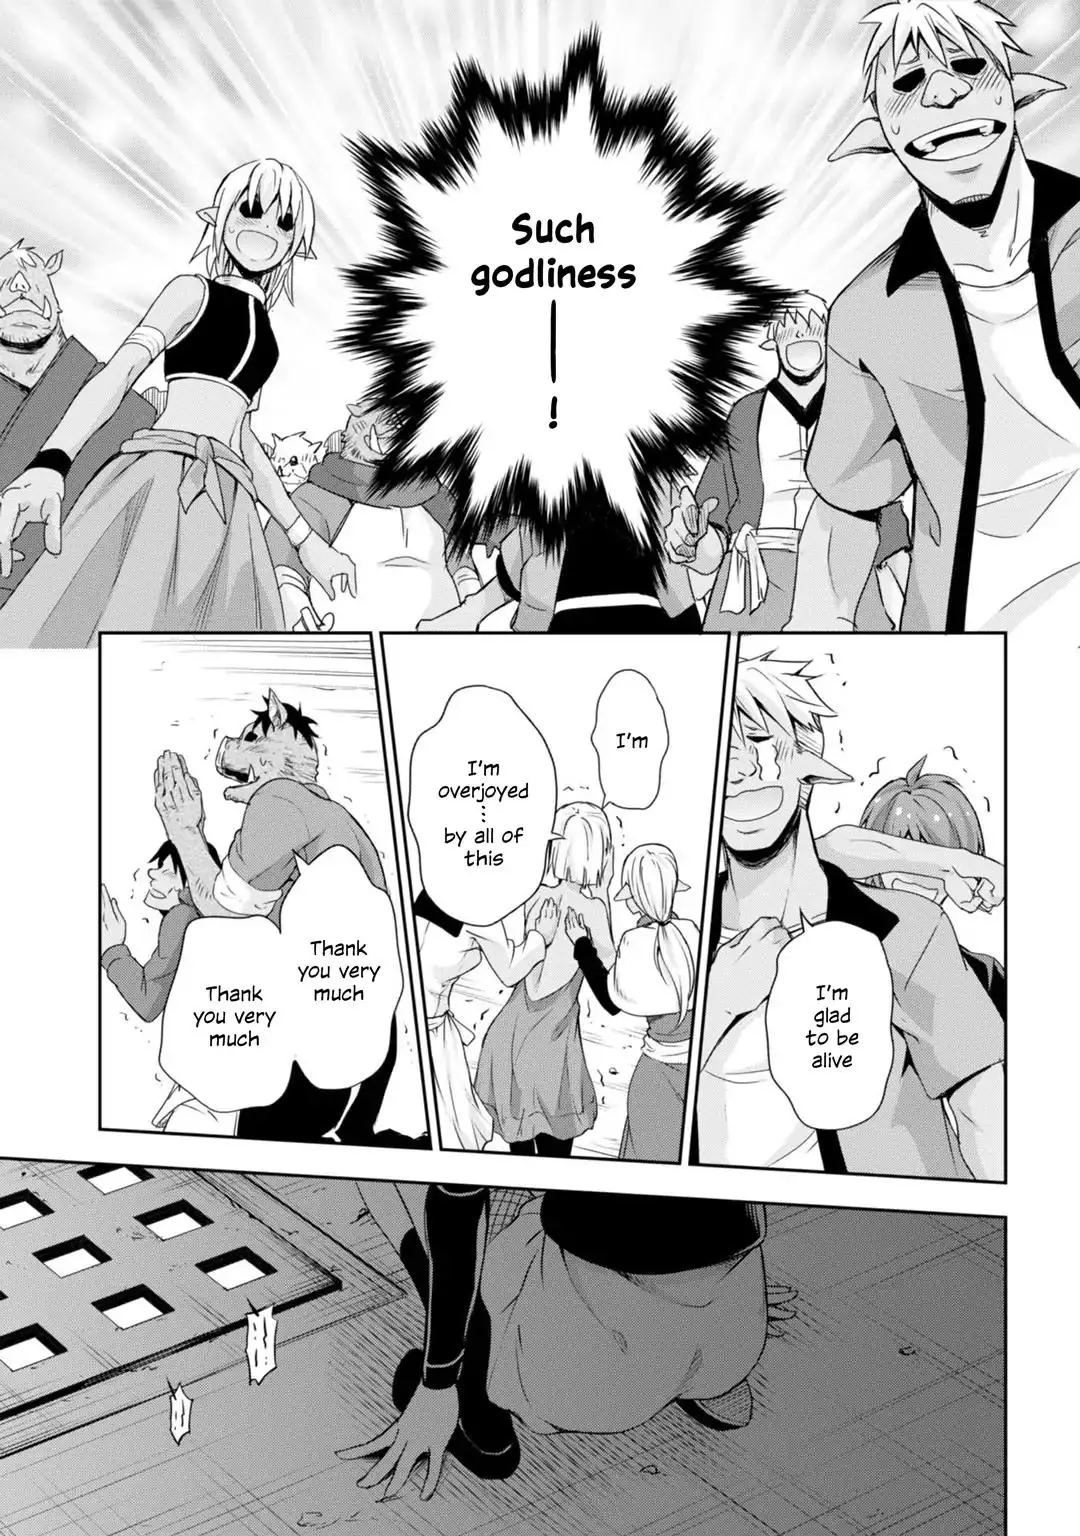 Tensei Shitara Slime Datta Ken: The Ways of Strolling in the Demon Country - 27 page 8